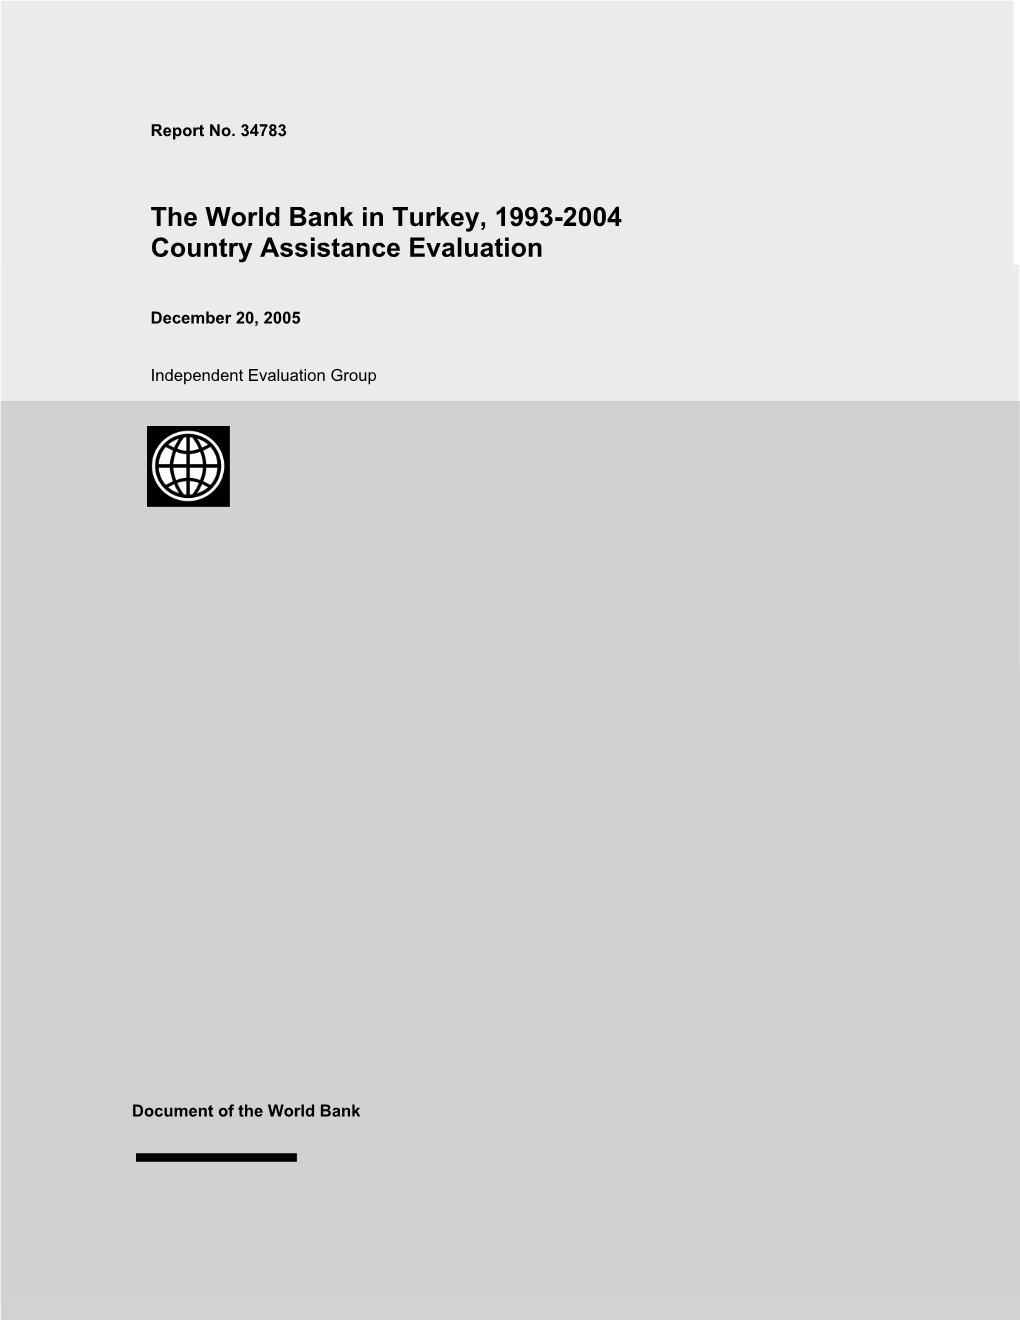 The World Bank in Turkey, 1993-2004 Country Assistance Evaluation